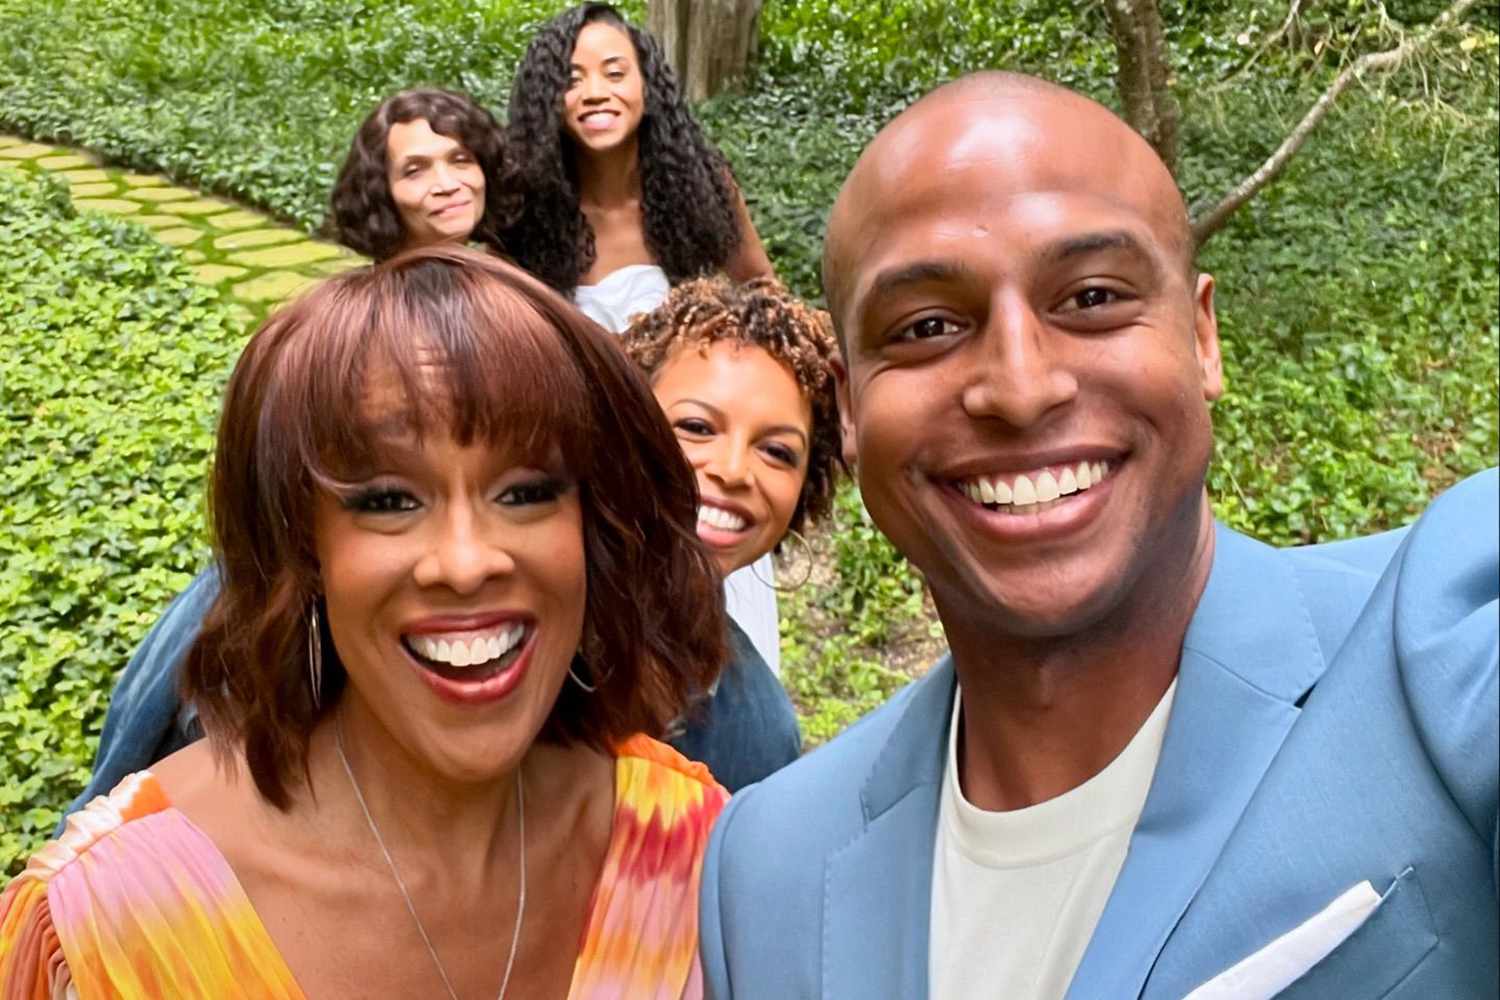 Gayle King Shares More Photos From Son’s Ongoing Wedding Celebration: ‘The Happiest Couple on the Planet’